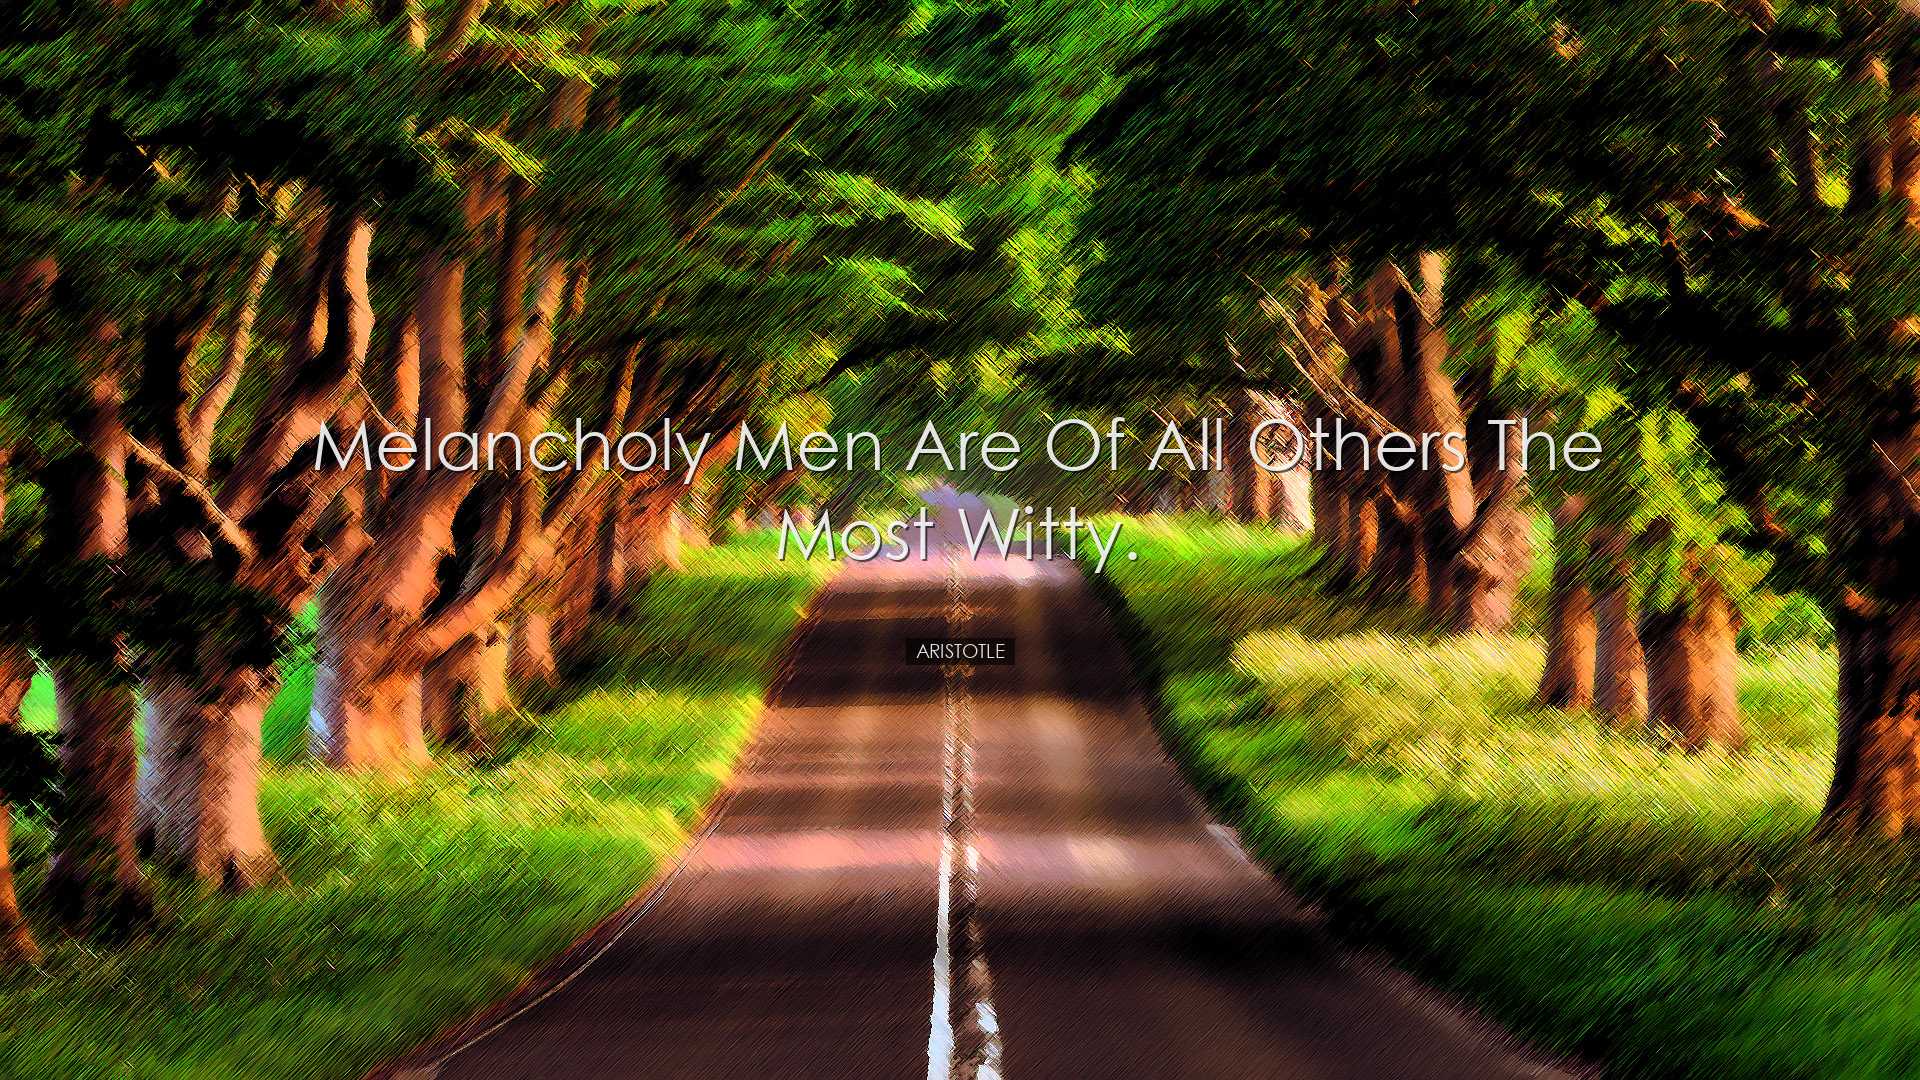 Melancholy men are of all others the most witty. - Aristotle